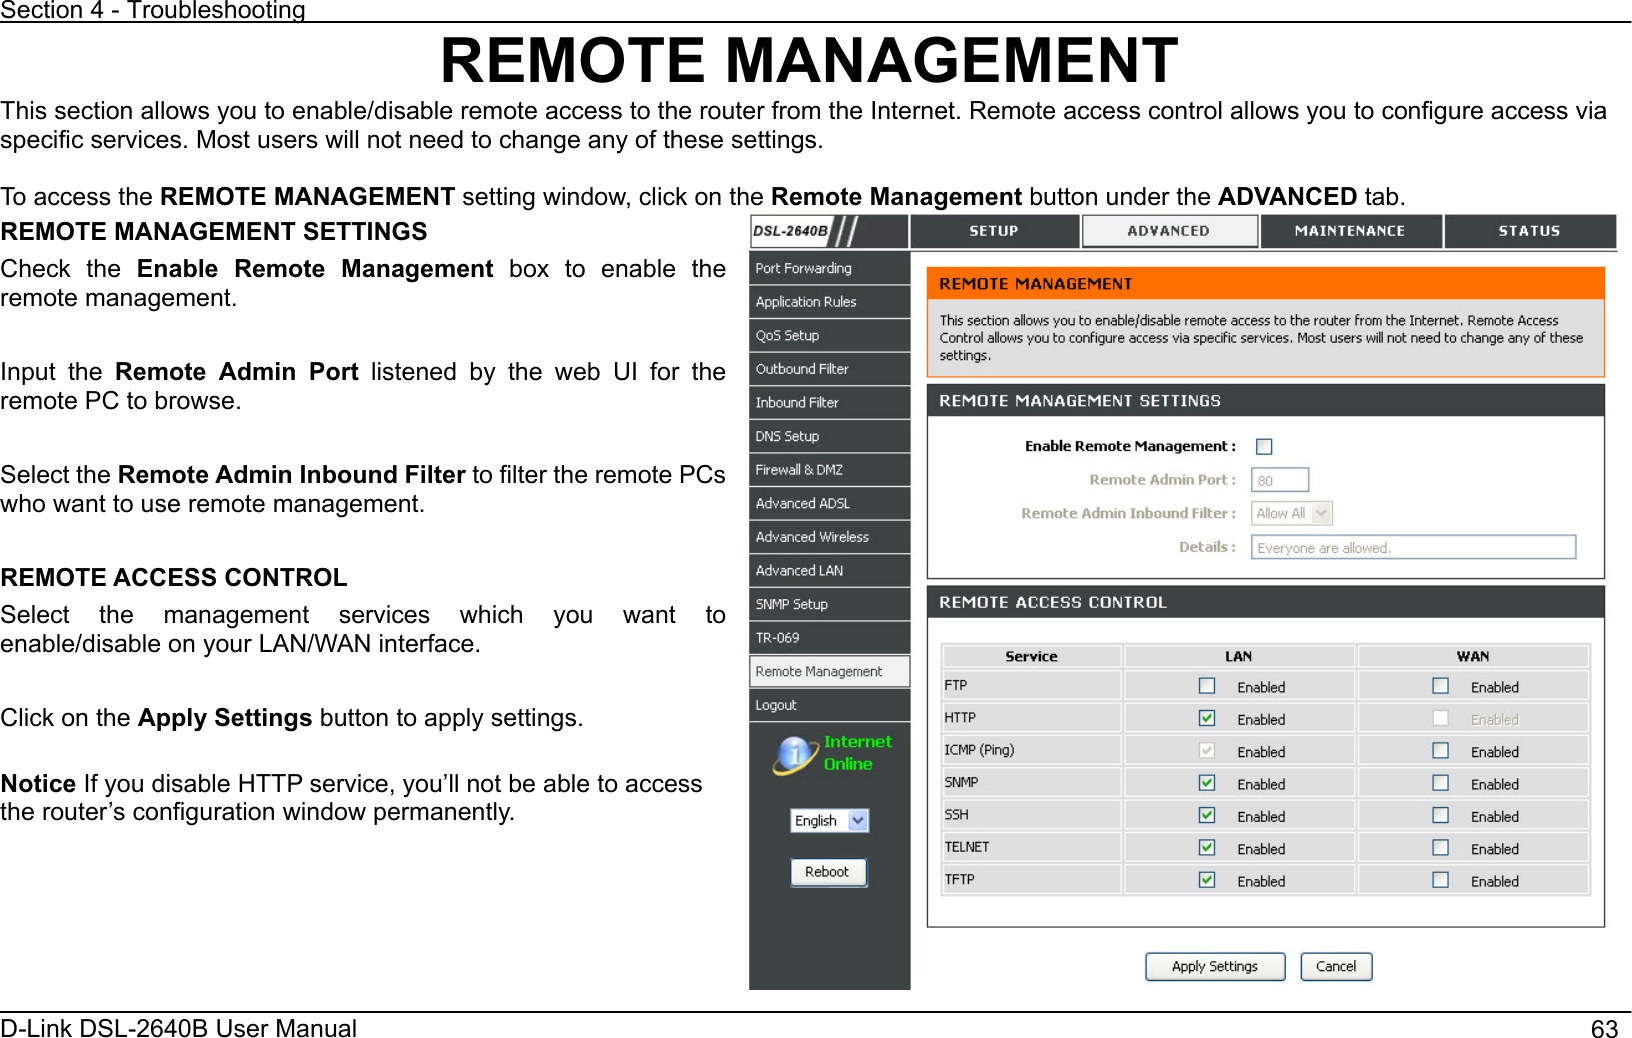 Section 4 - Troubleshooting D-Link DSL-2640B User Manual                                       63REMOTE MANAGEMENT This section allows you to enable/disable remote access to the router from the Internet. Remote access control allows you to configure access via specific services. Most users will not need to change any of these settings. To access the REMOTE MANAGEMENT setting window, click on the Remote Management button under the ADVANCED tab. REMOTE MANAGEMENT SETTINGS Check the Enable Remote Management box to enable the remote management. Input the Remote Admin Port listened by the web UI for the remote PC to browse. Select the Remote Admin Inbound Filter to filter the remote PCs who want to use remote management. REMOTE ACCESS CONTROL Select the management services which you want to enable/disable on your LAN/WAN interface. Click on the Apply Settings button to apply settings. Notice If you disable HTTP service, you’ll not be able to access the router’s configuration window permanently. 